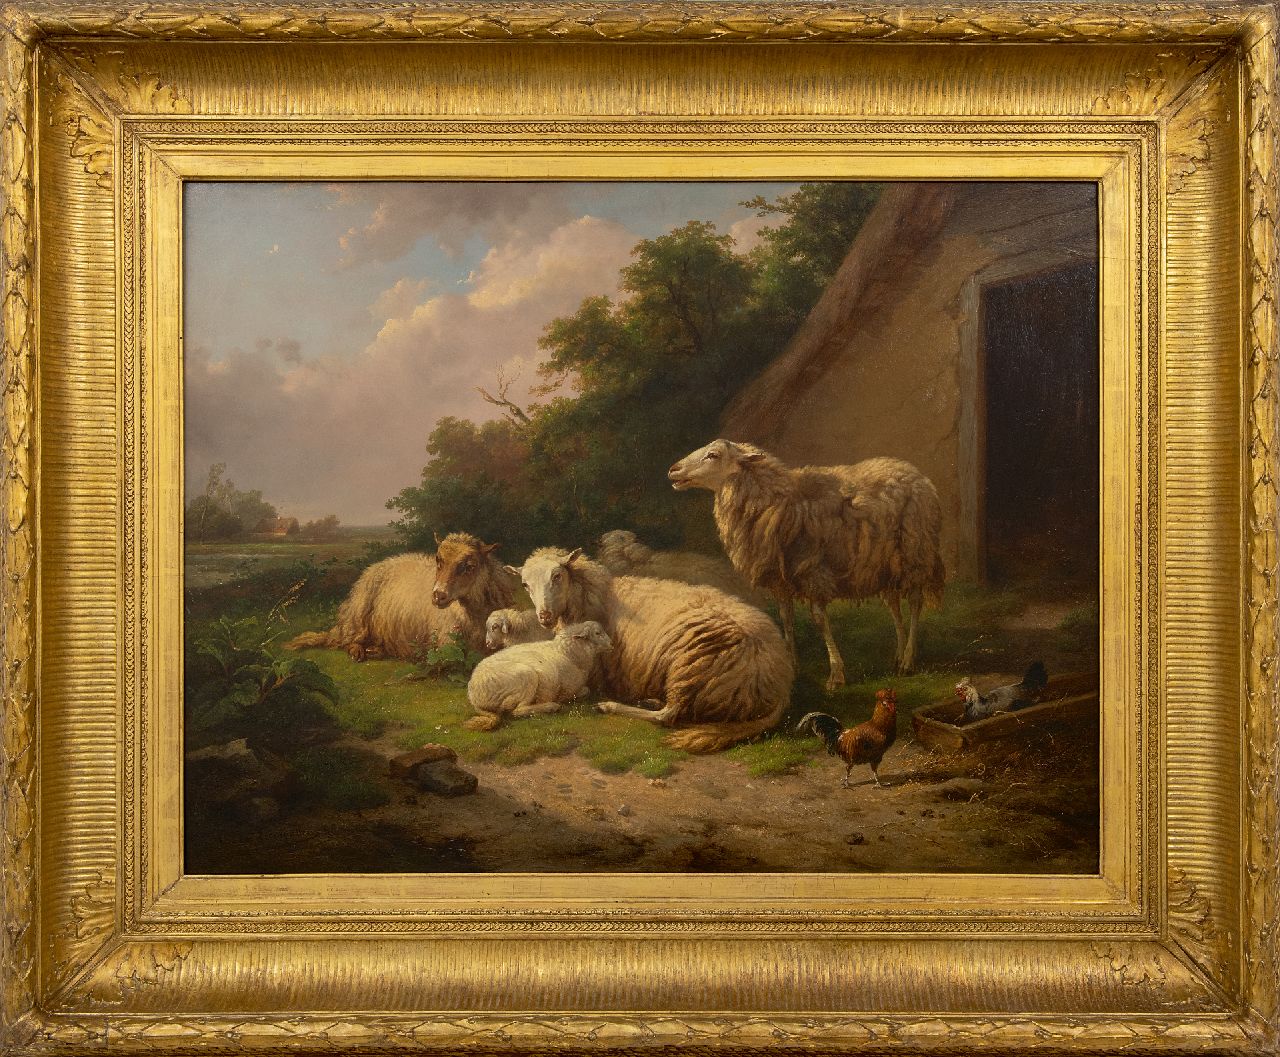 Leemputten C. van | Cornelis van Leemputten | Paintings offered for sale | Sheep at rest outside a shed, oil on panel 64.9 x 86.0 cm, signed l.l. and dated '68